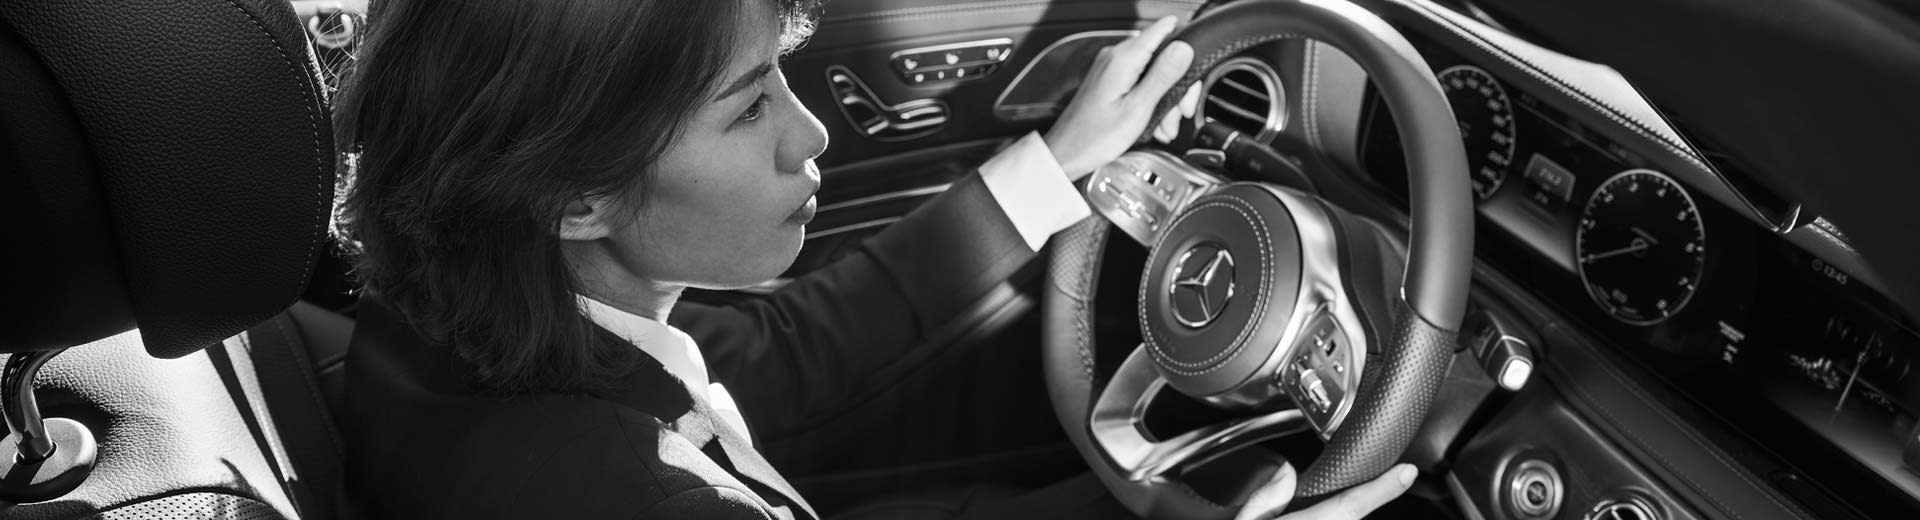 Blacklane chauffeur partner Yen sits in the front seat of a Mercedes, both hands on the wheel and focused on the road.